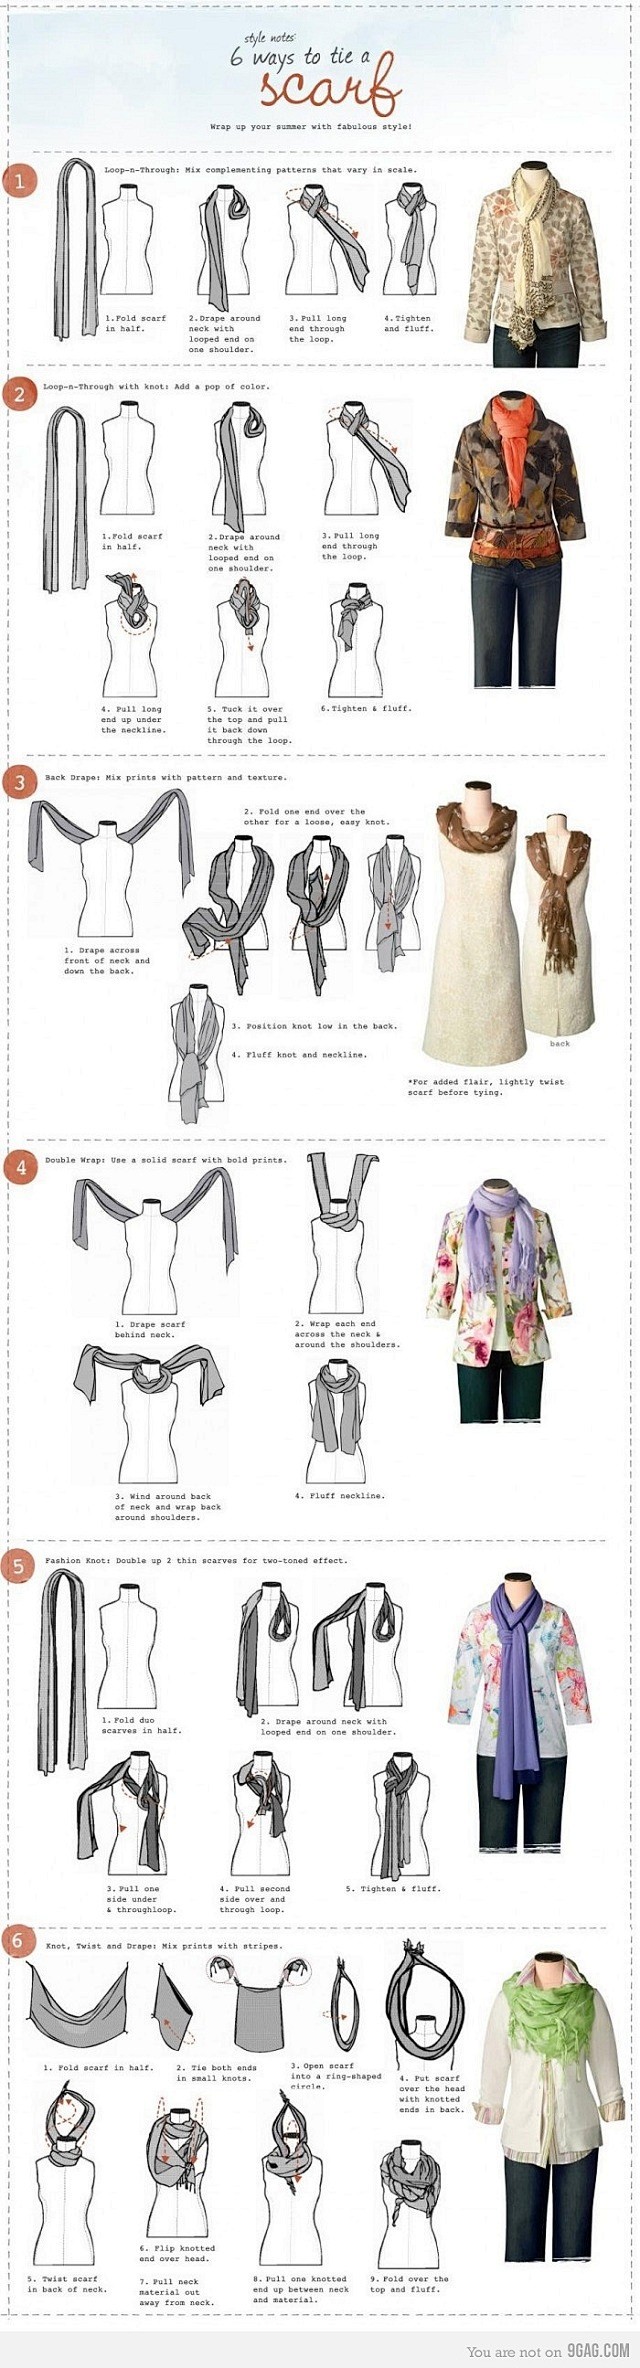 how-to-tie-a-scarf